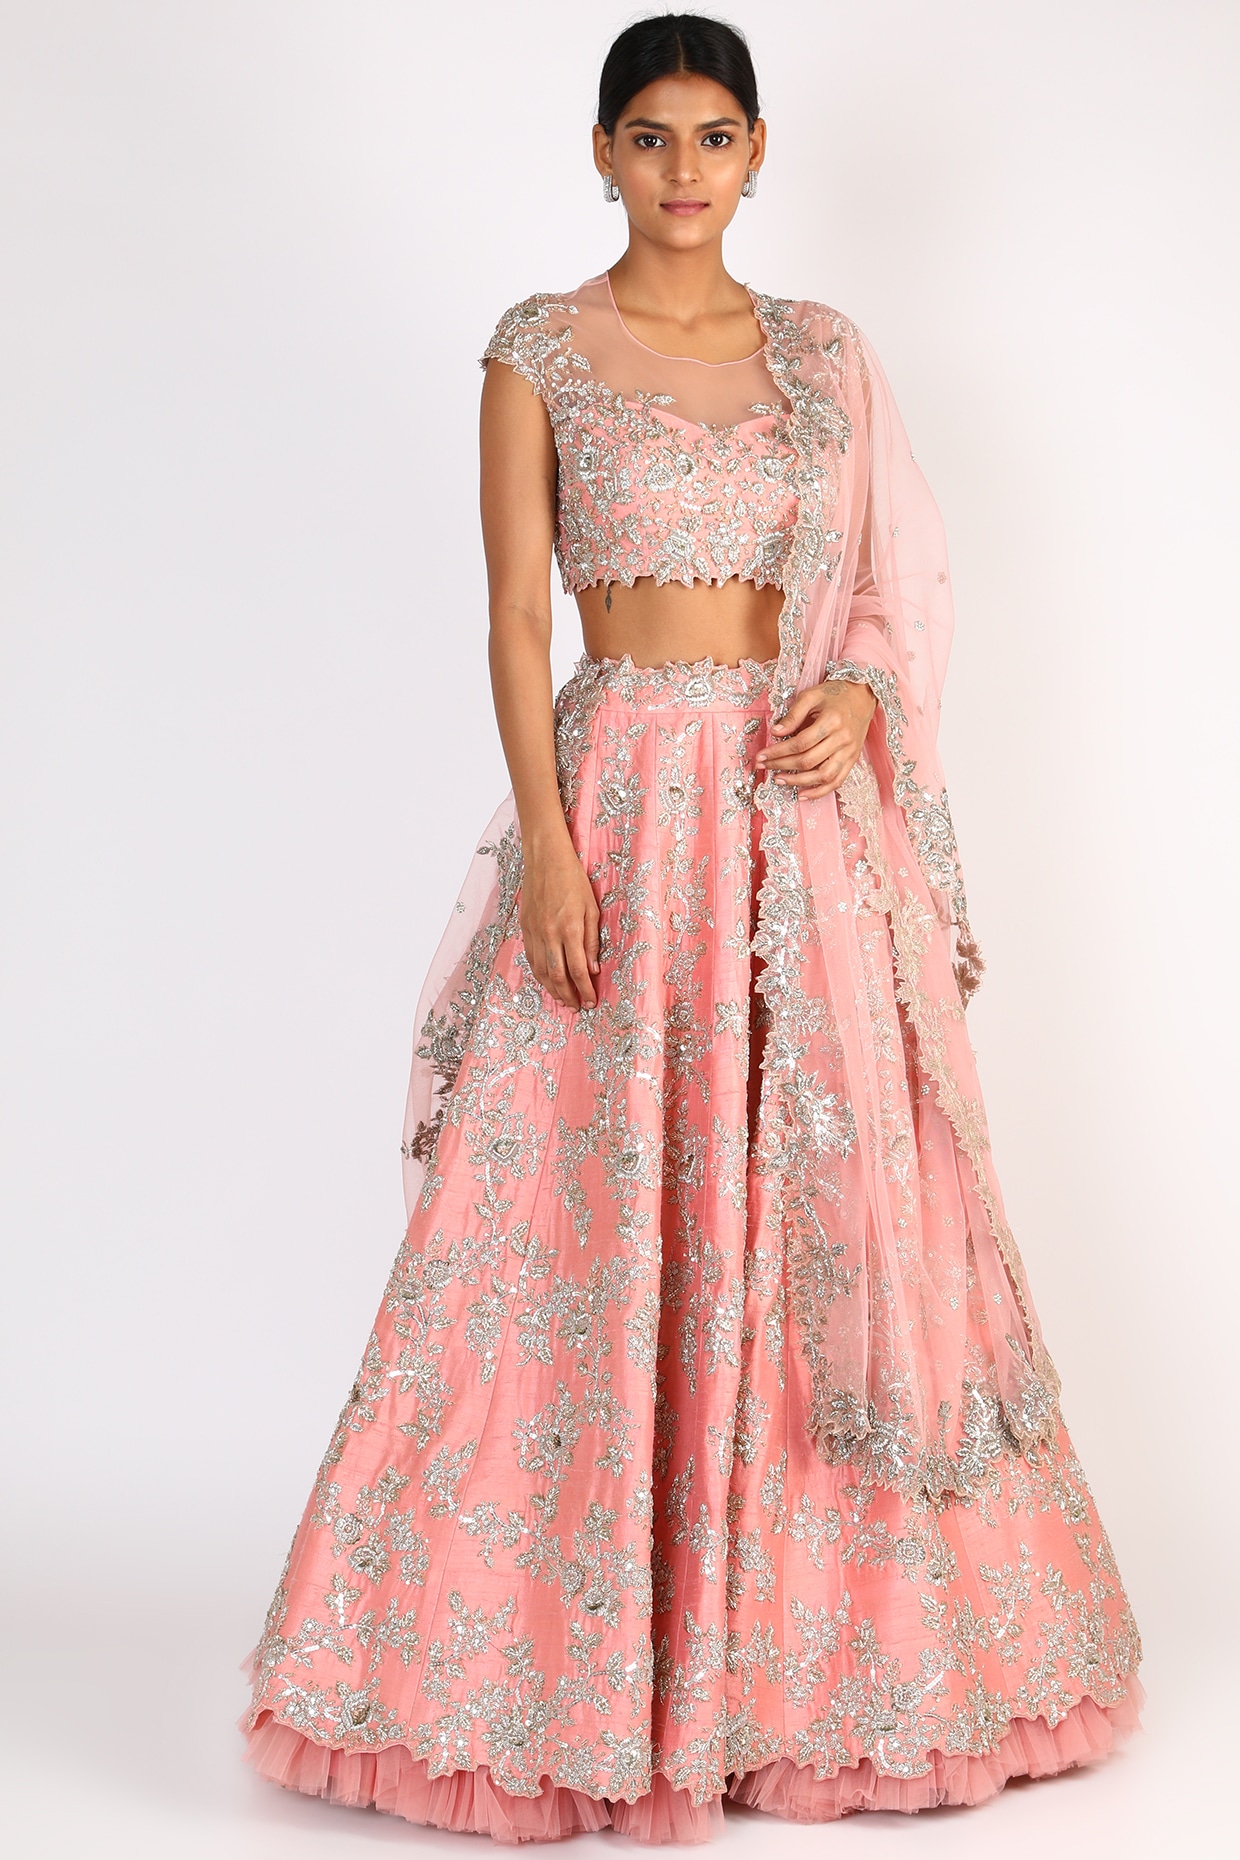 Anushree Reddy - A collection that enunciates the nuances of the Bridal  era, Sarang explores the charming details from the palette of ritualistic  expressions. Explore more from Sarang, visit our store between